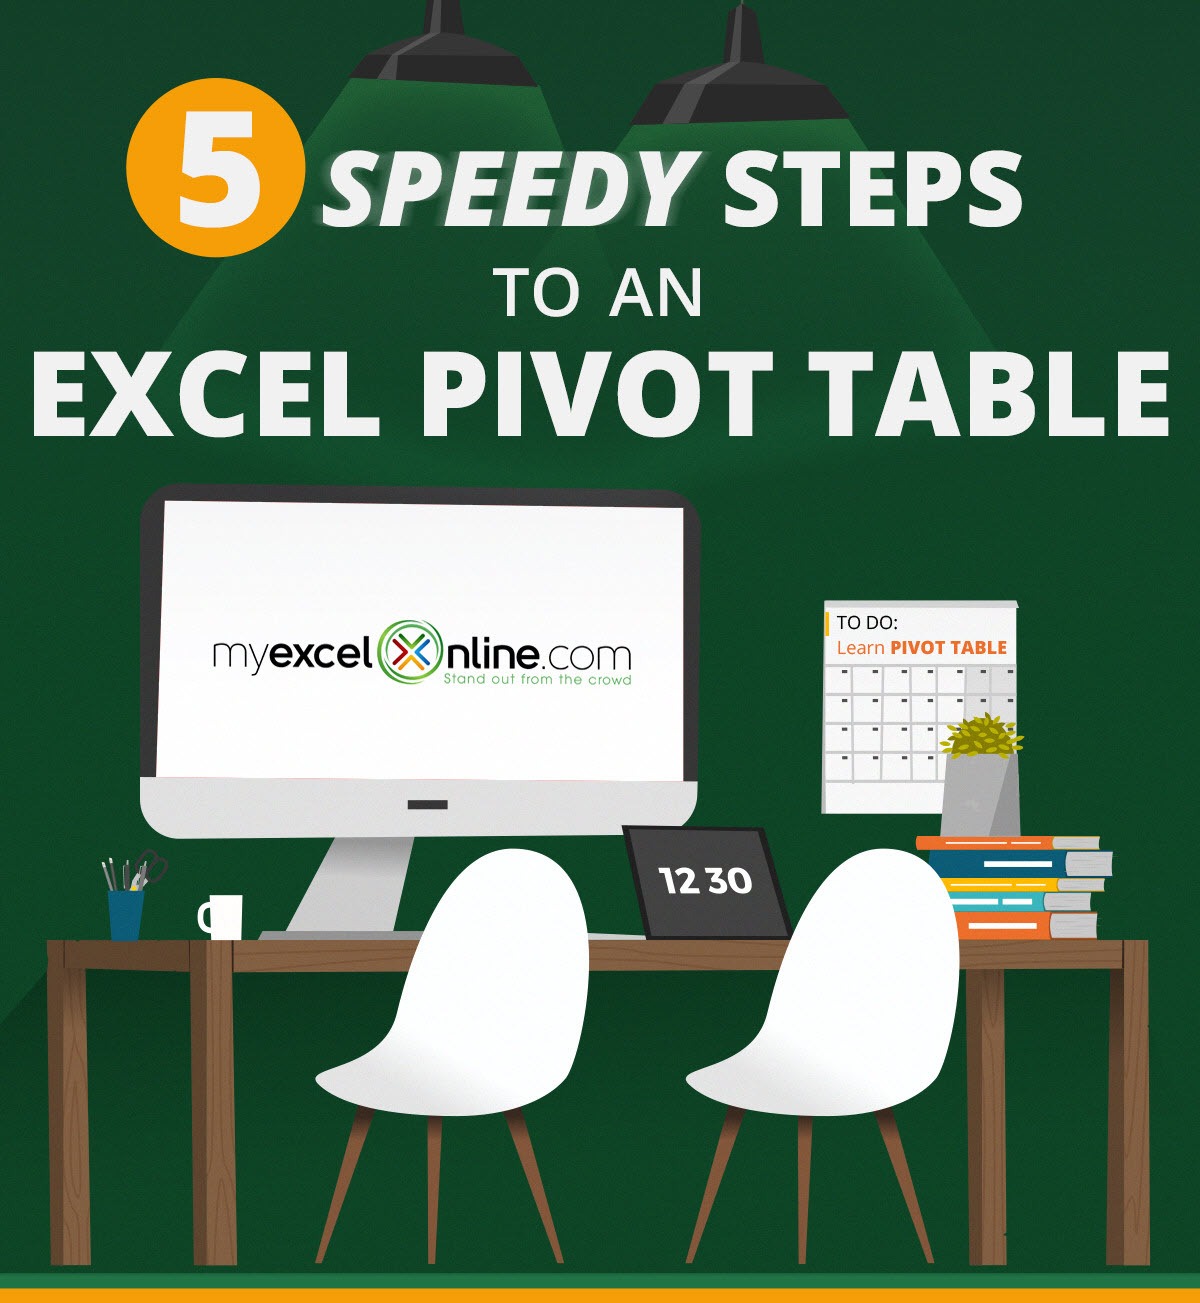 5 Speedy Steps To An Excel Pivot Table! (infographic)